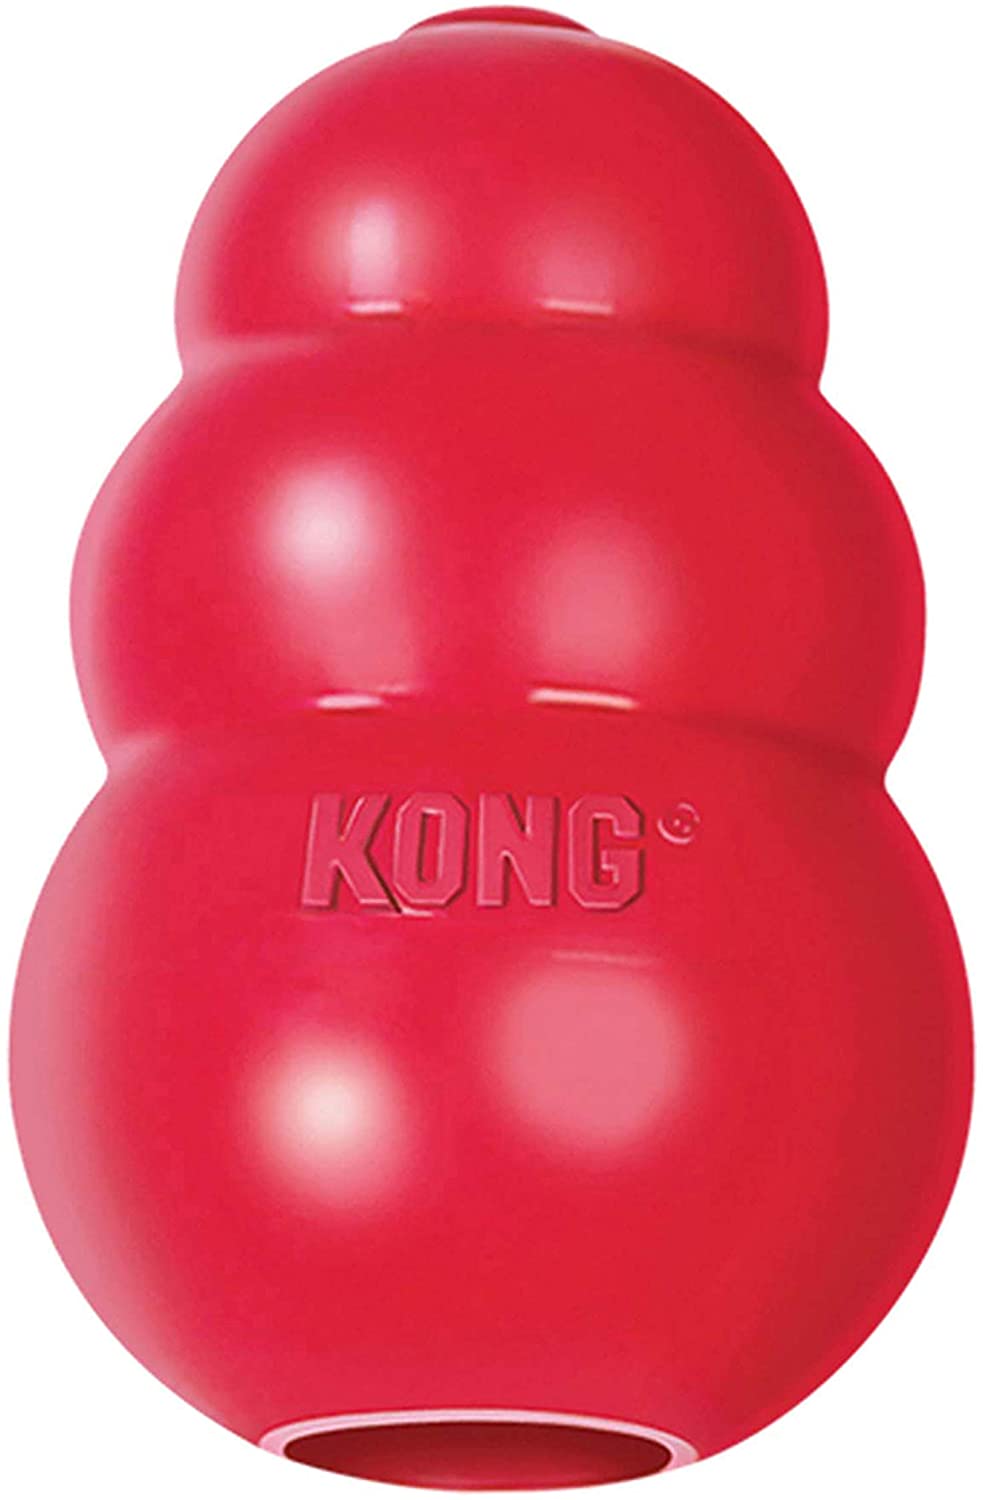 KONG - Classic Dog Toy, Durable Natural Rubber - Large